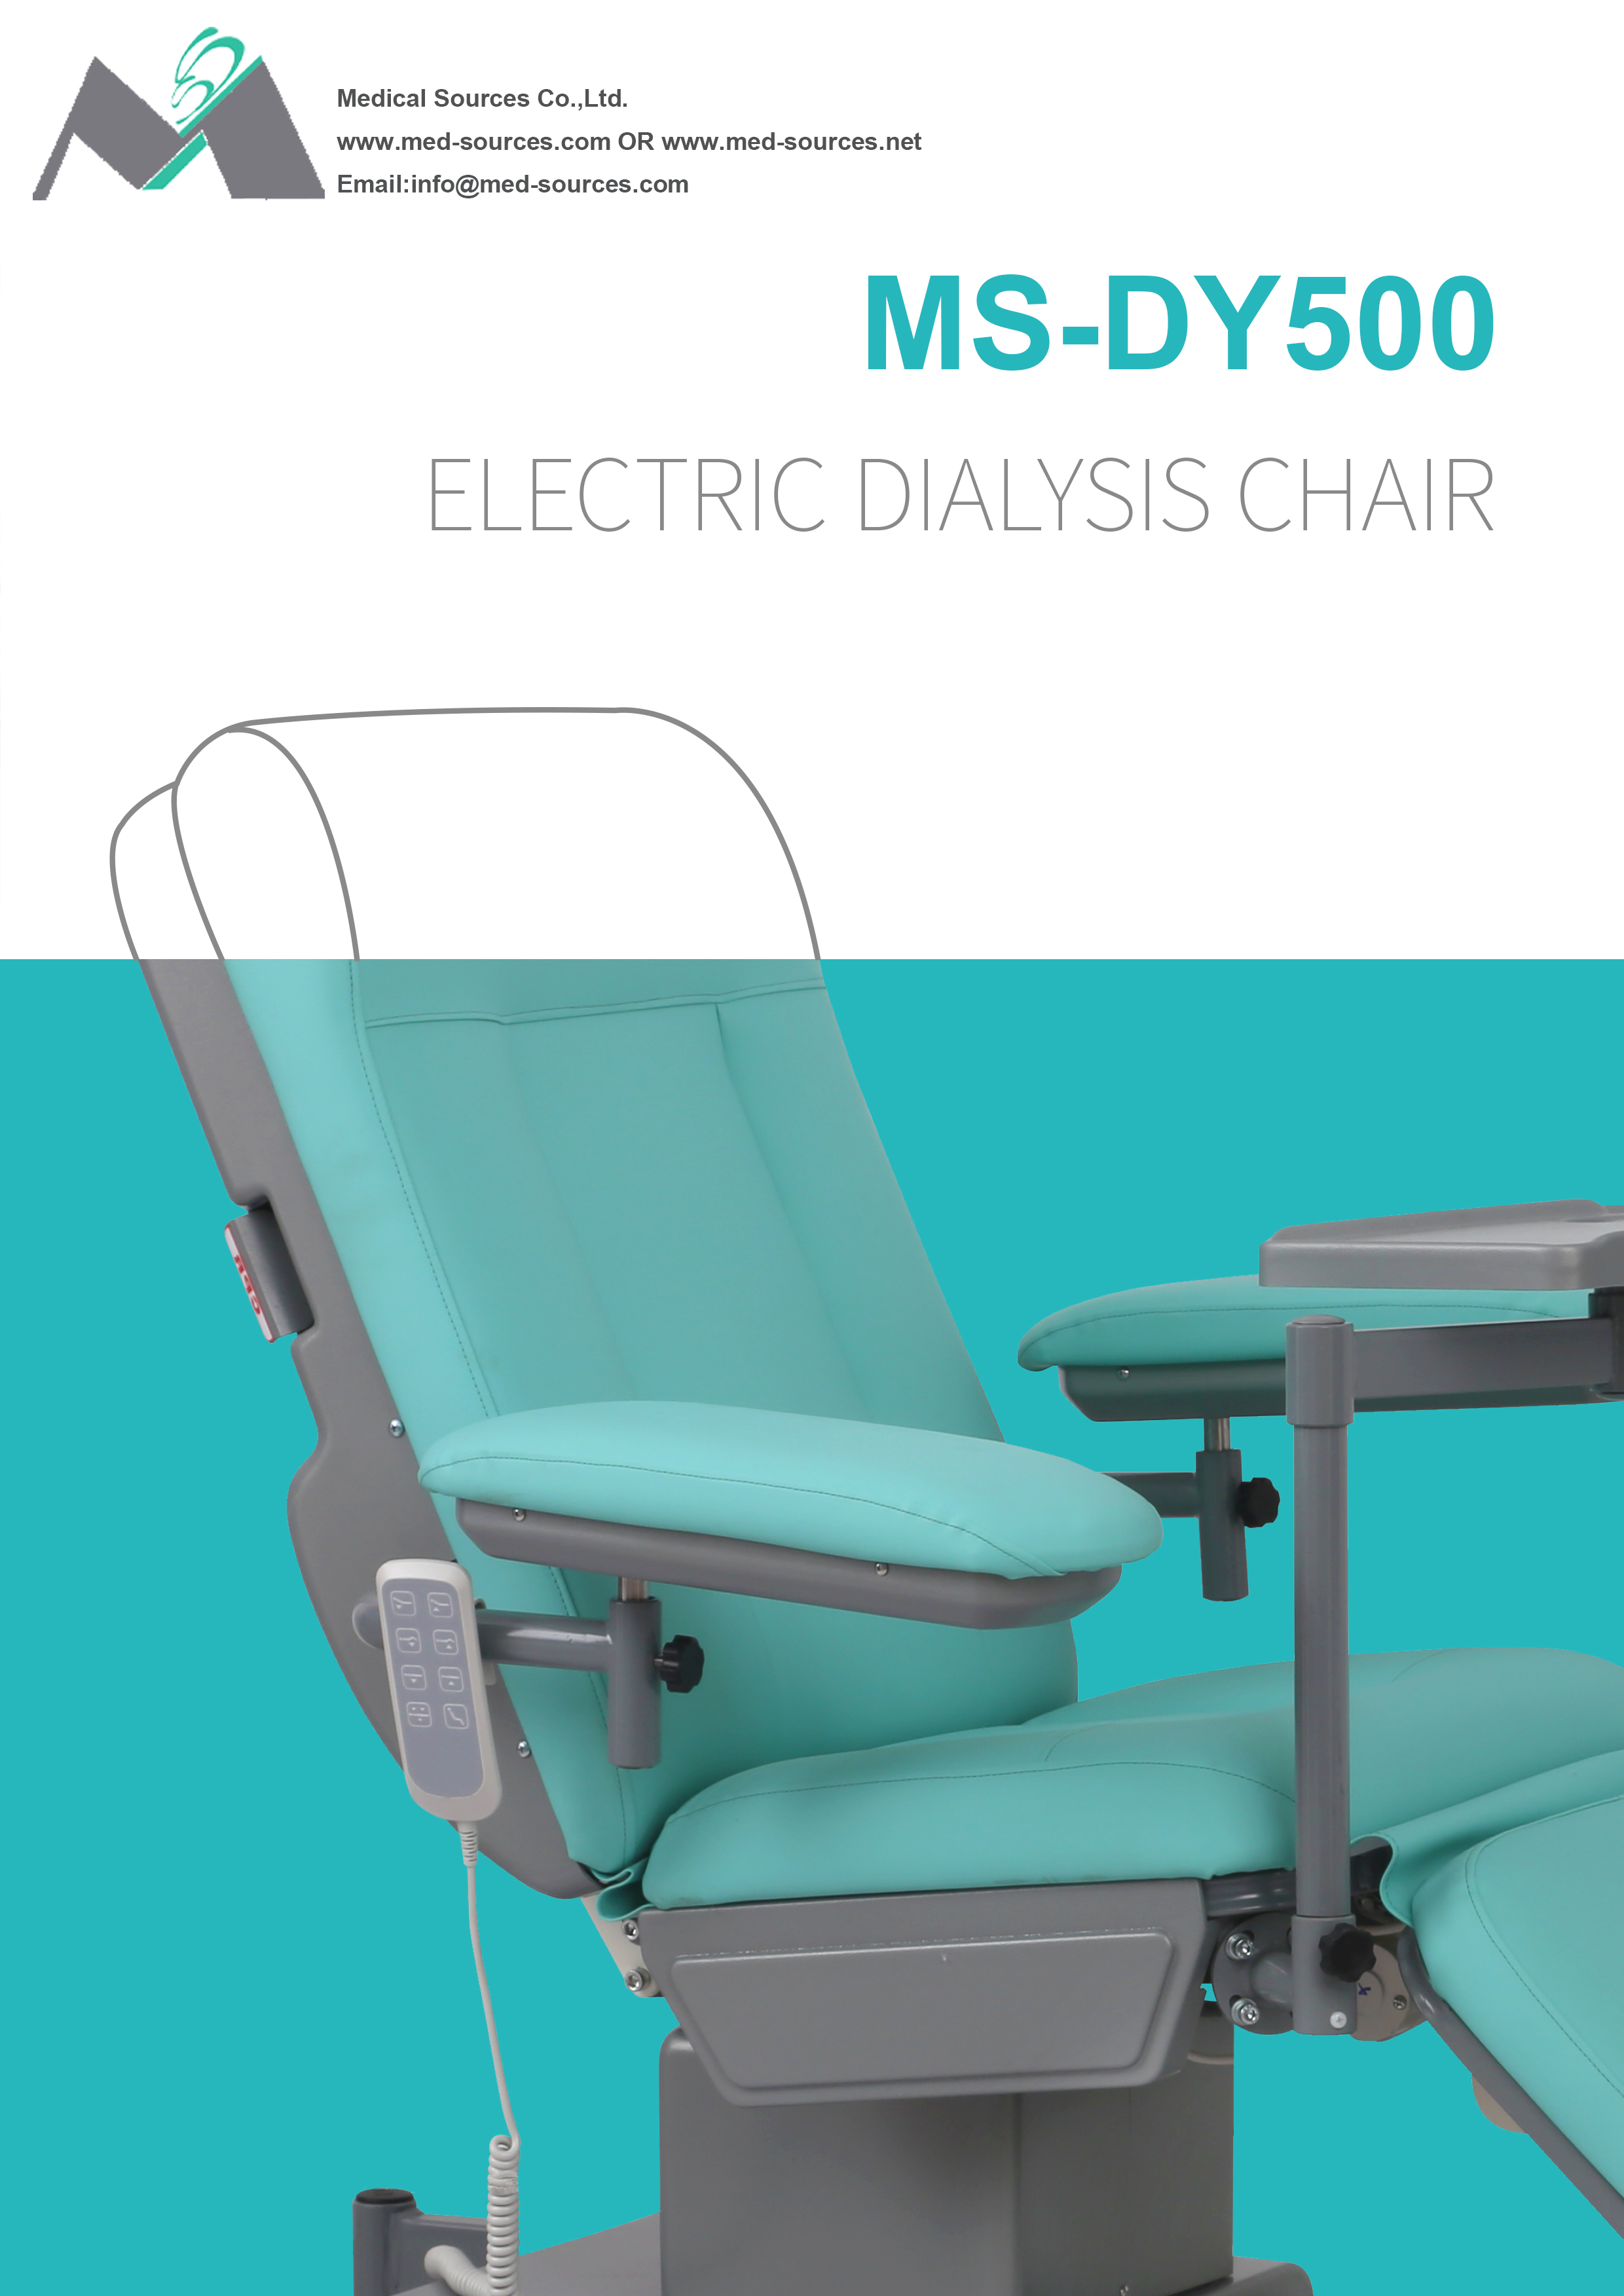 MS-DY500 Electric Dialysis Chair-1